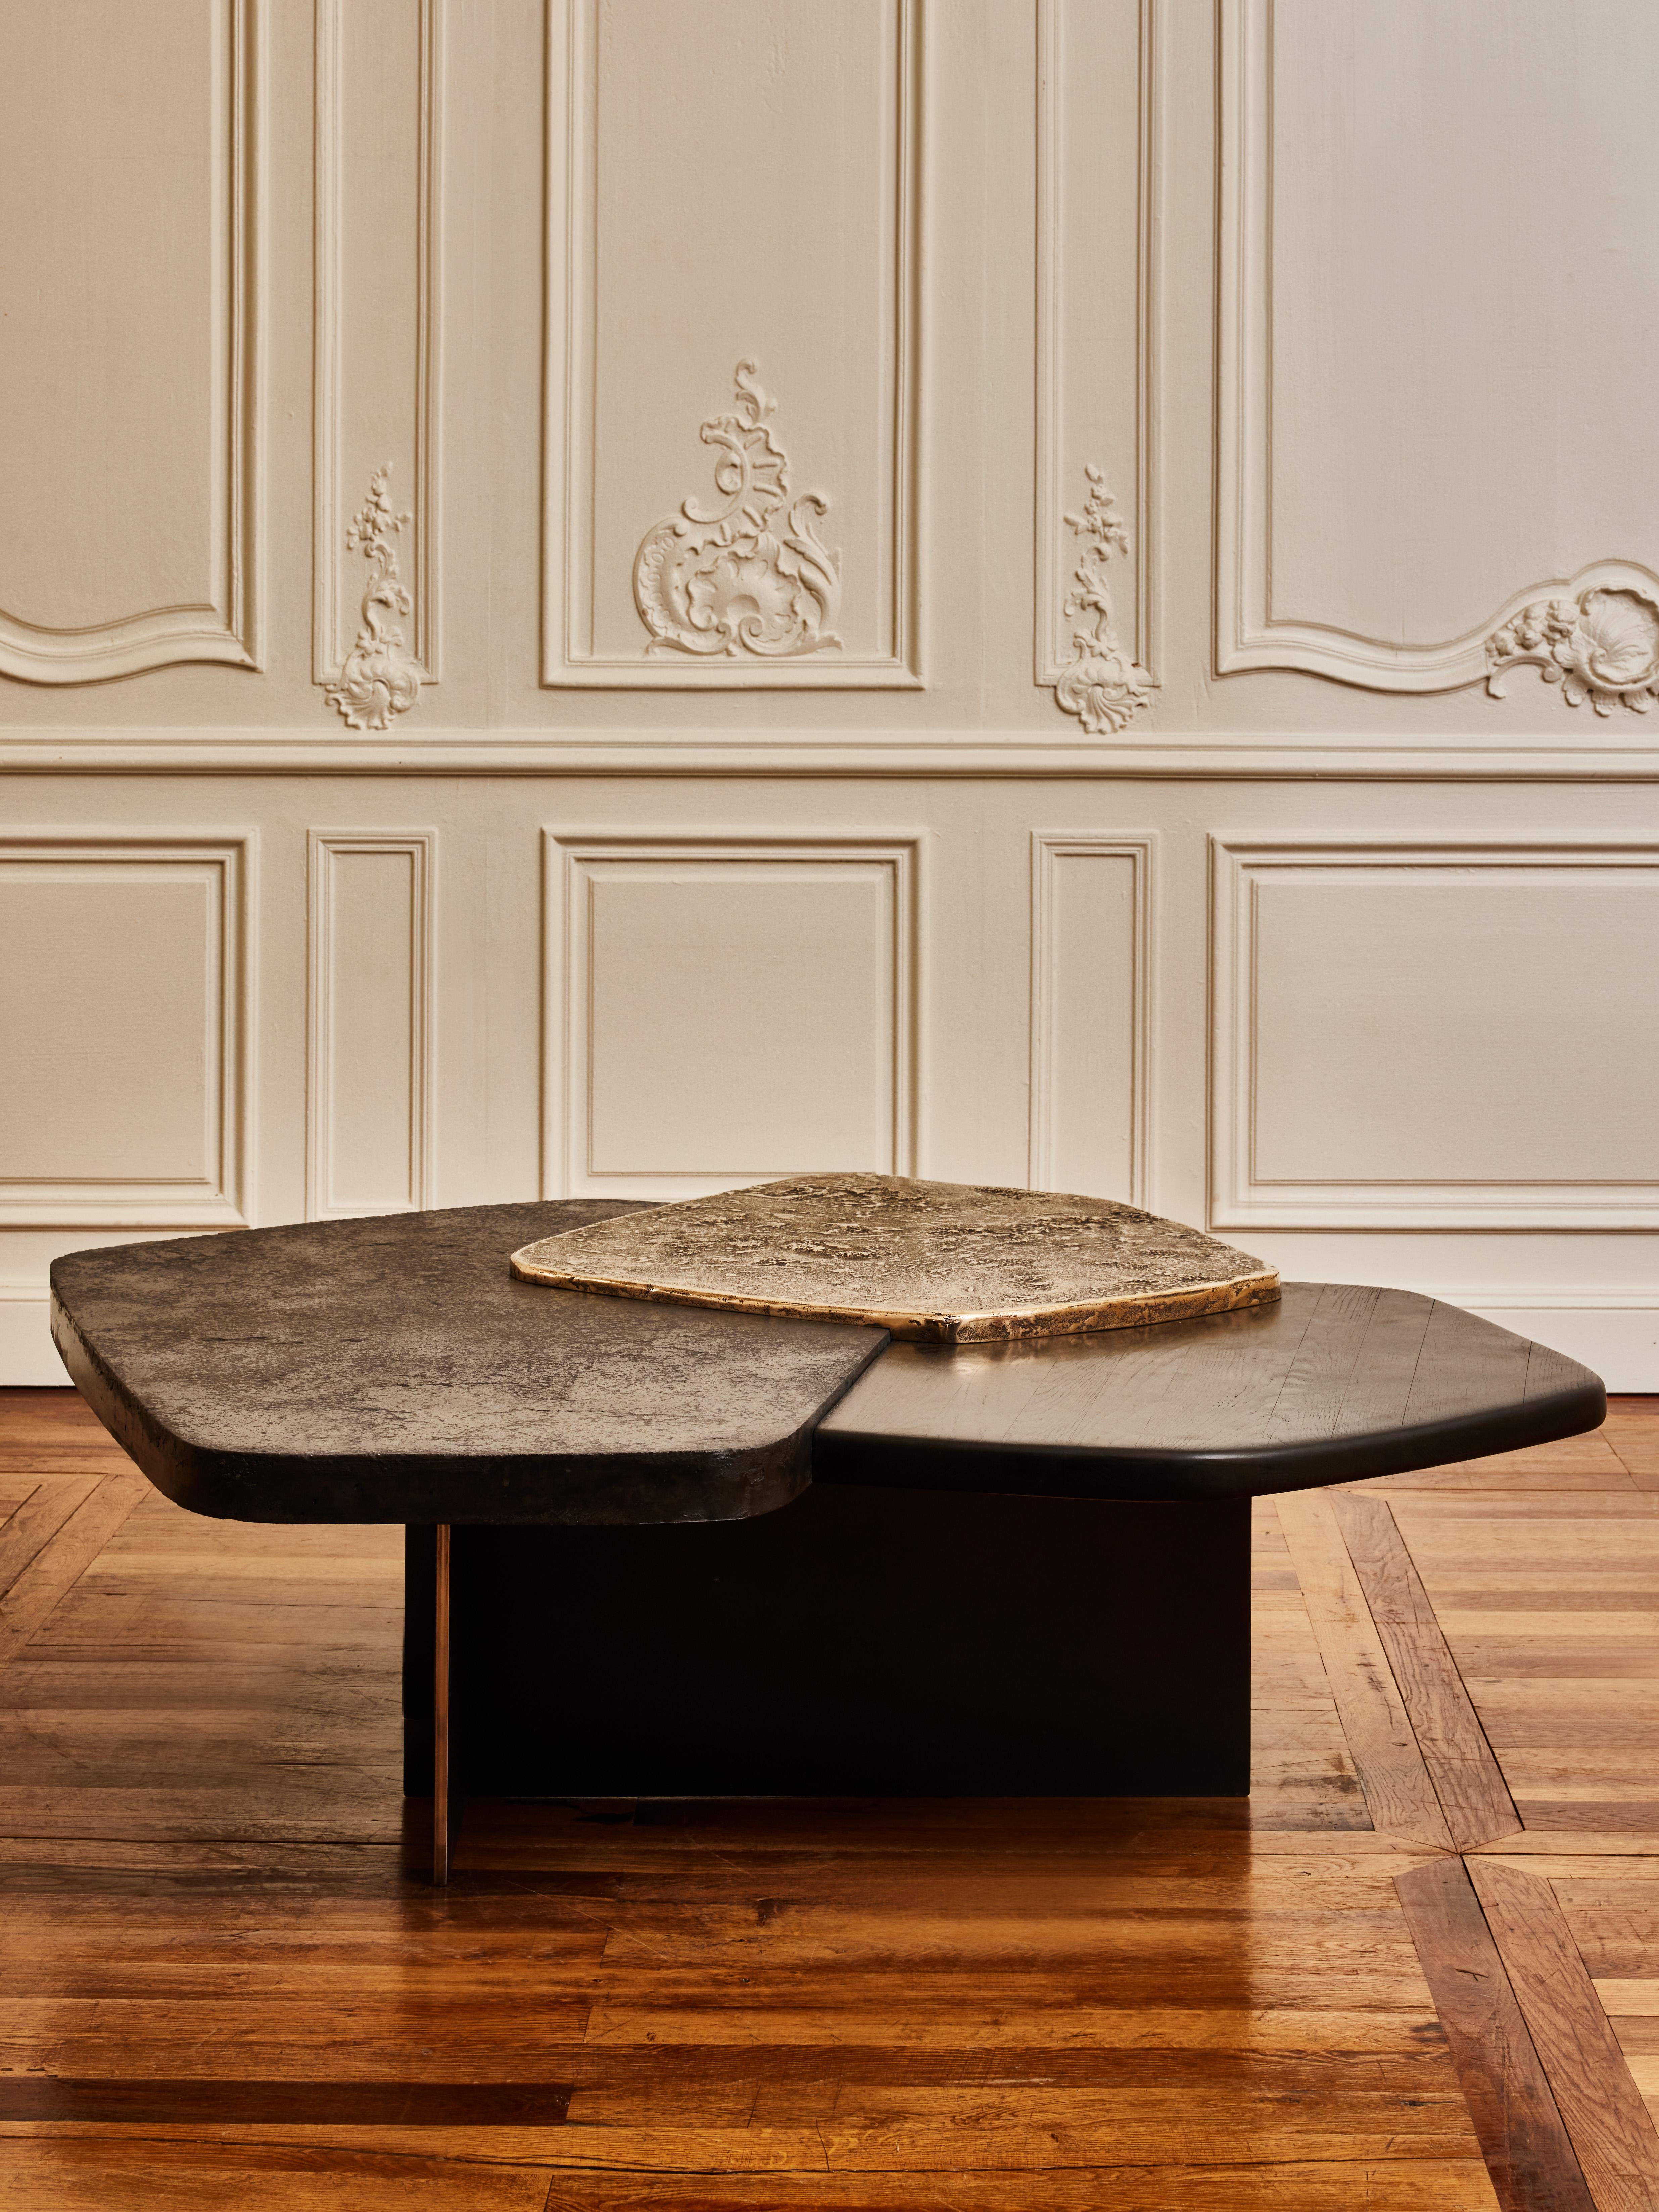 Superb coffee table in waxed concrete, burnt wood and patinated bronze.
Numbered and signed piece by the artist Erwan Boulloud.
France, 2023.

